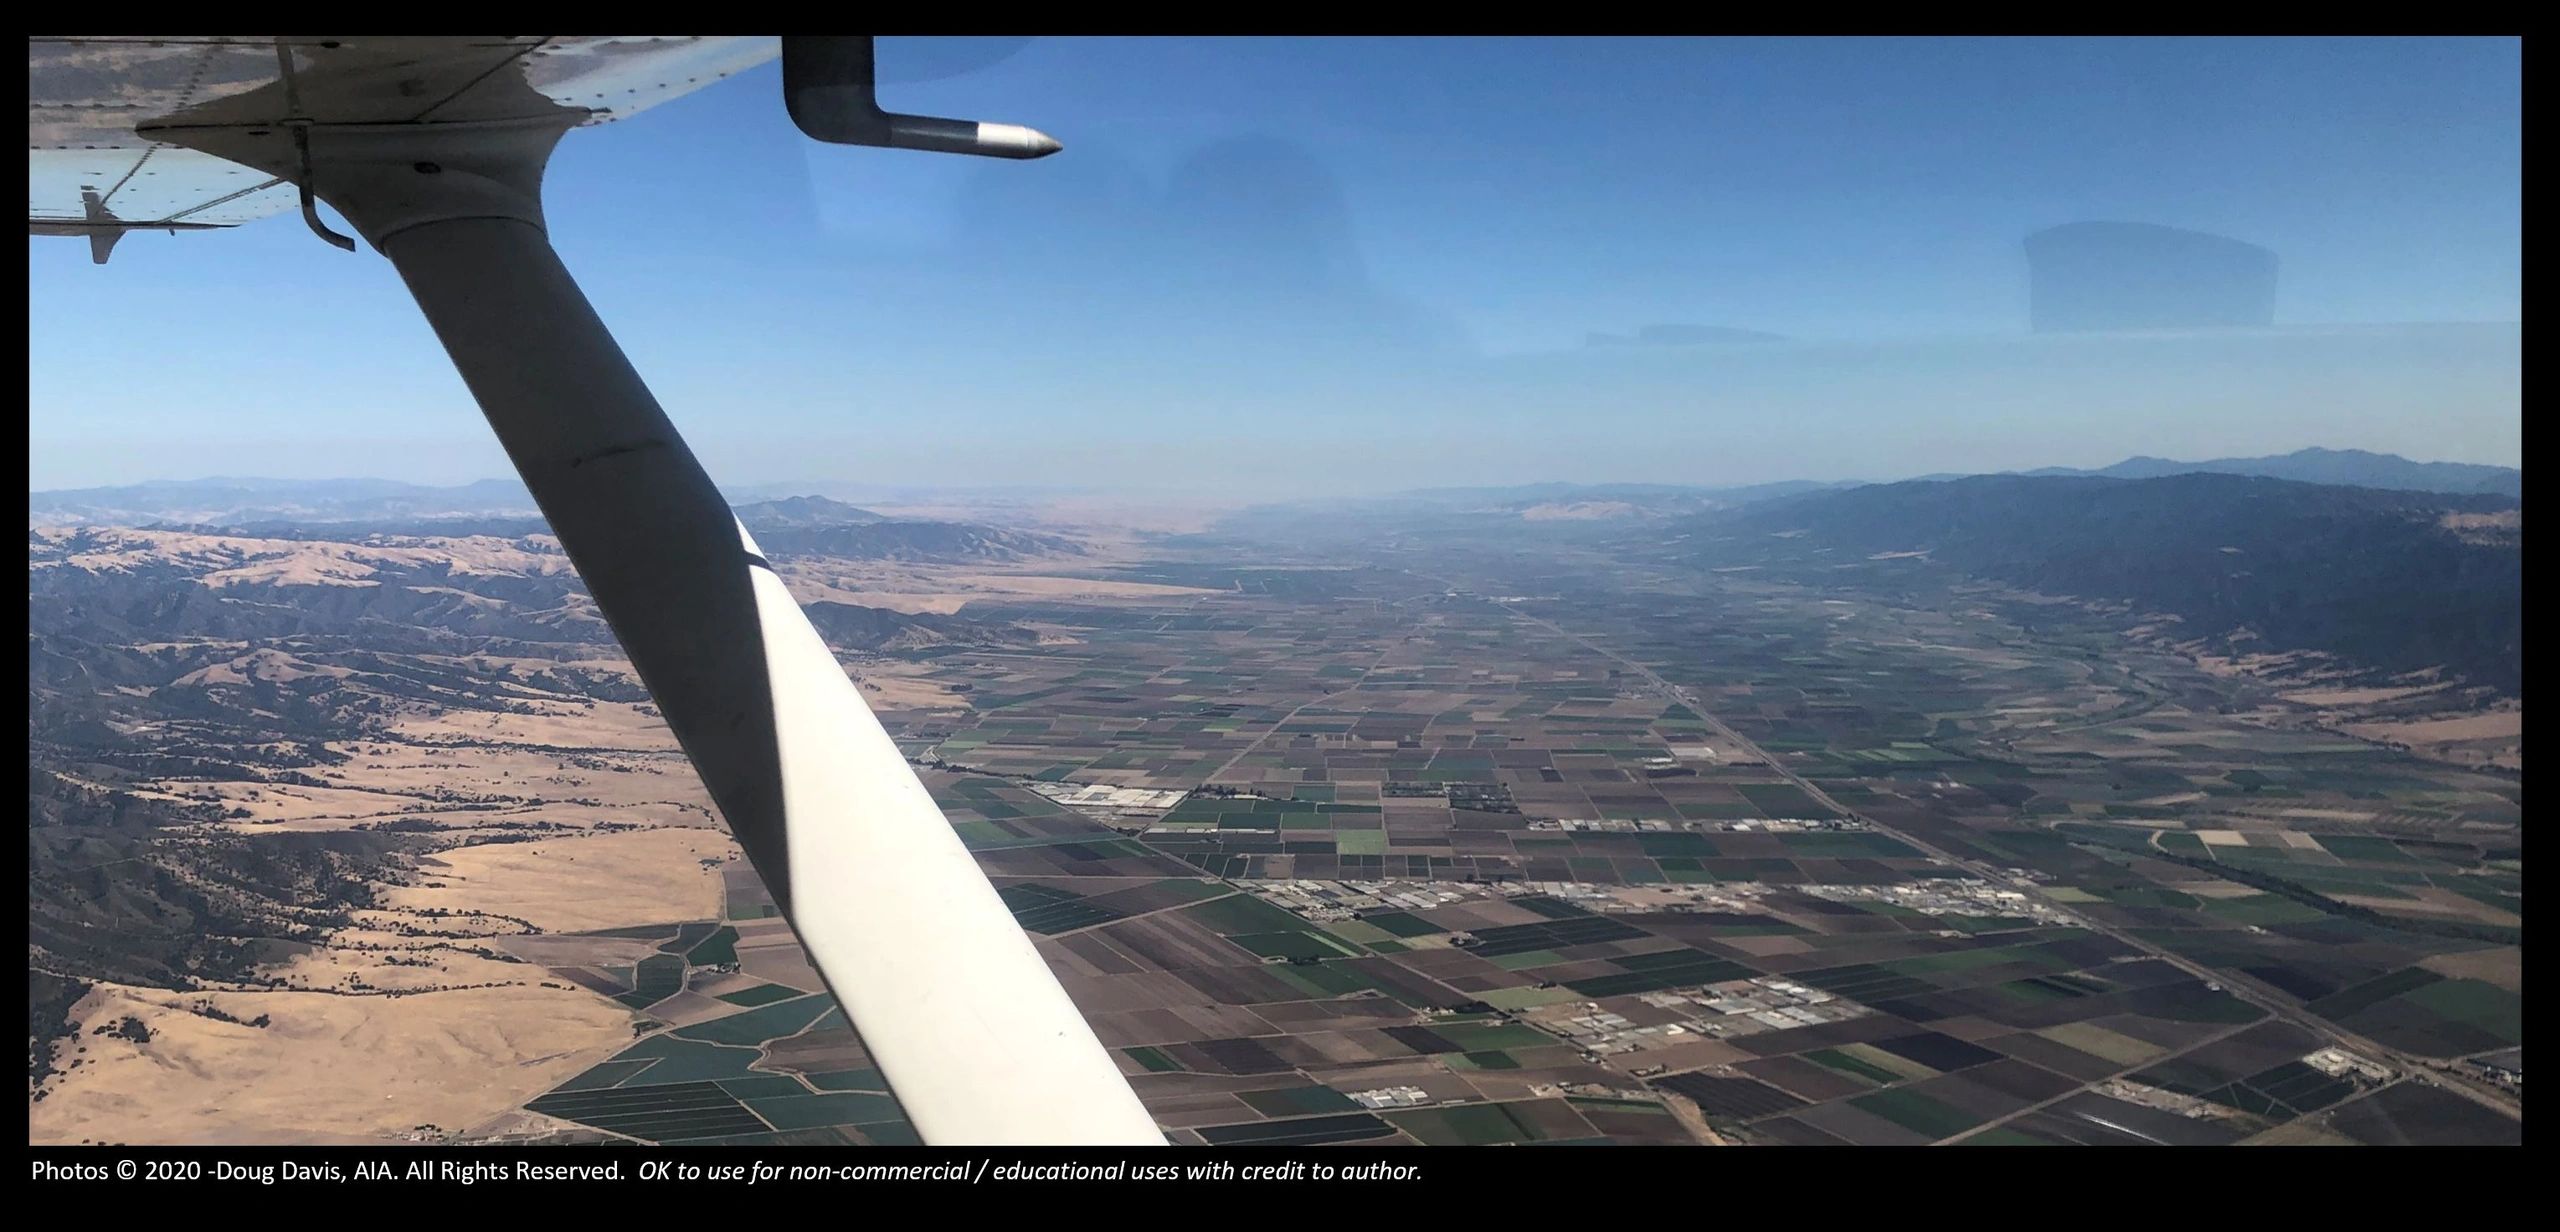 Low Frequency Radio Range, Four Course Radio Range:  Aerial View of Salinas Valley